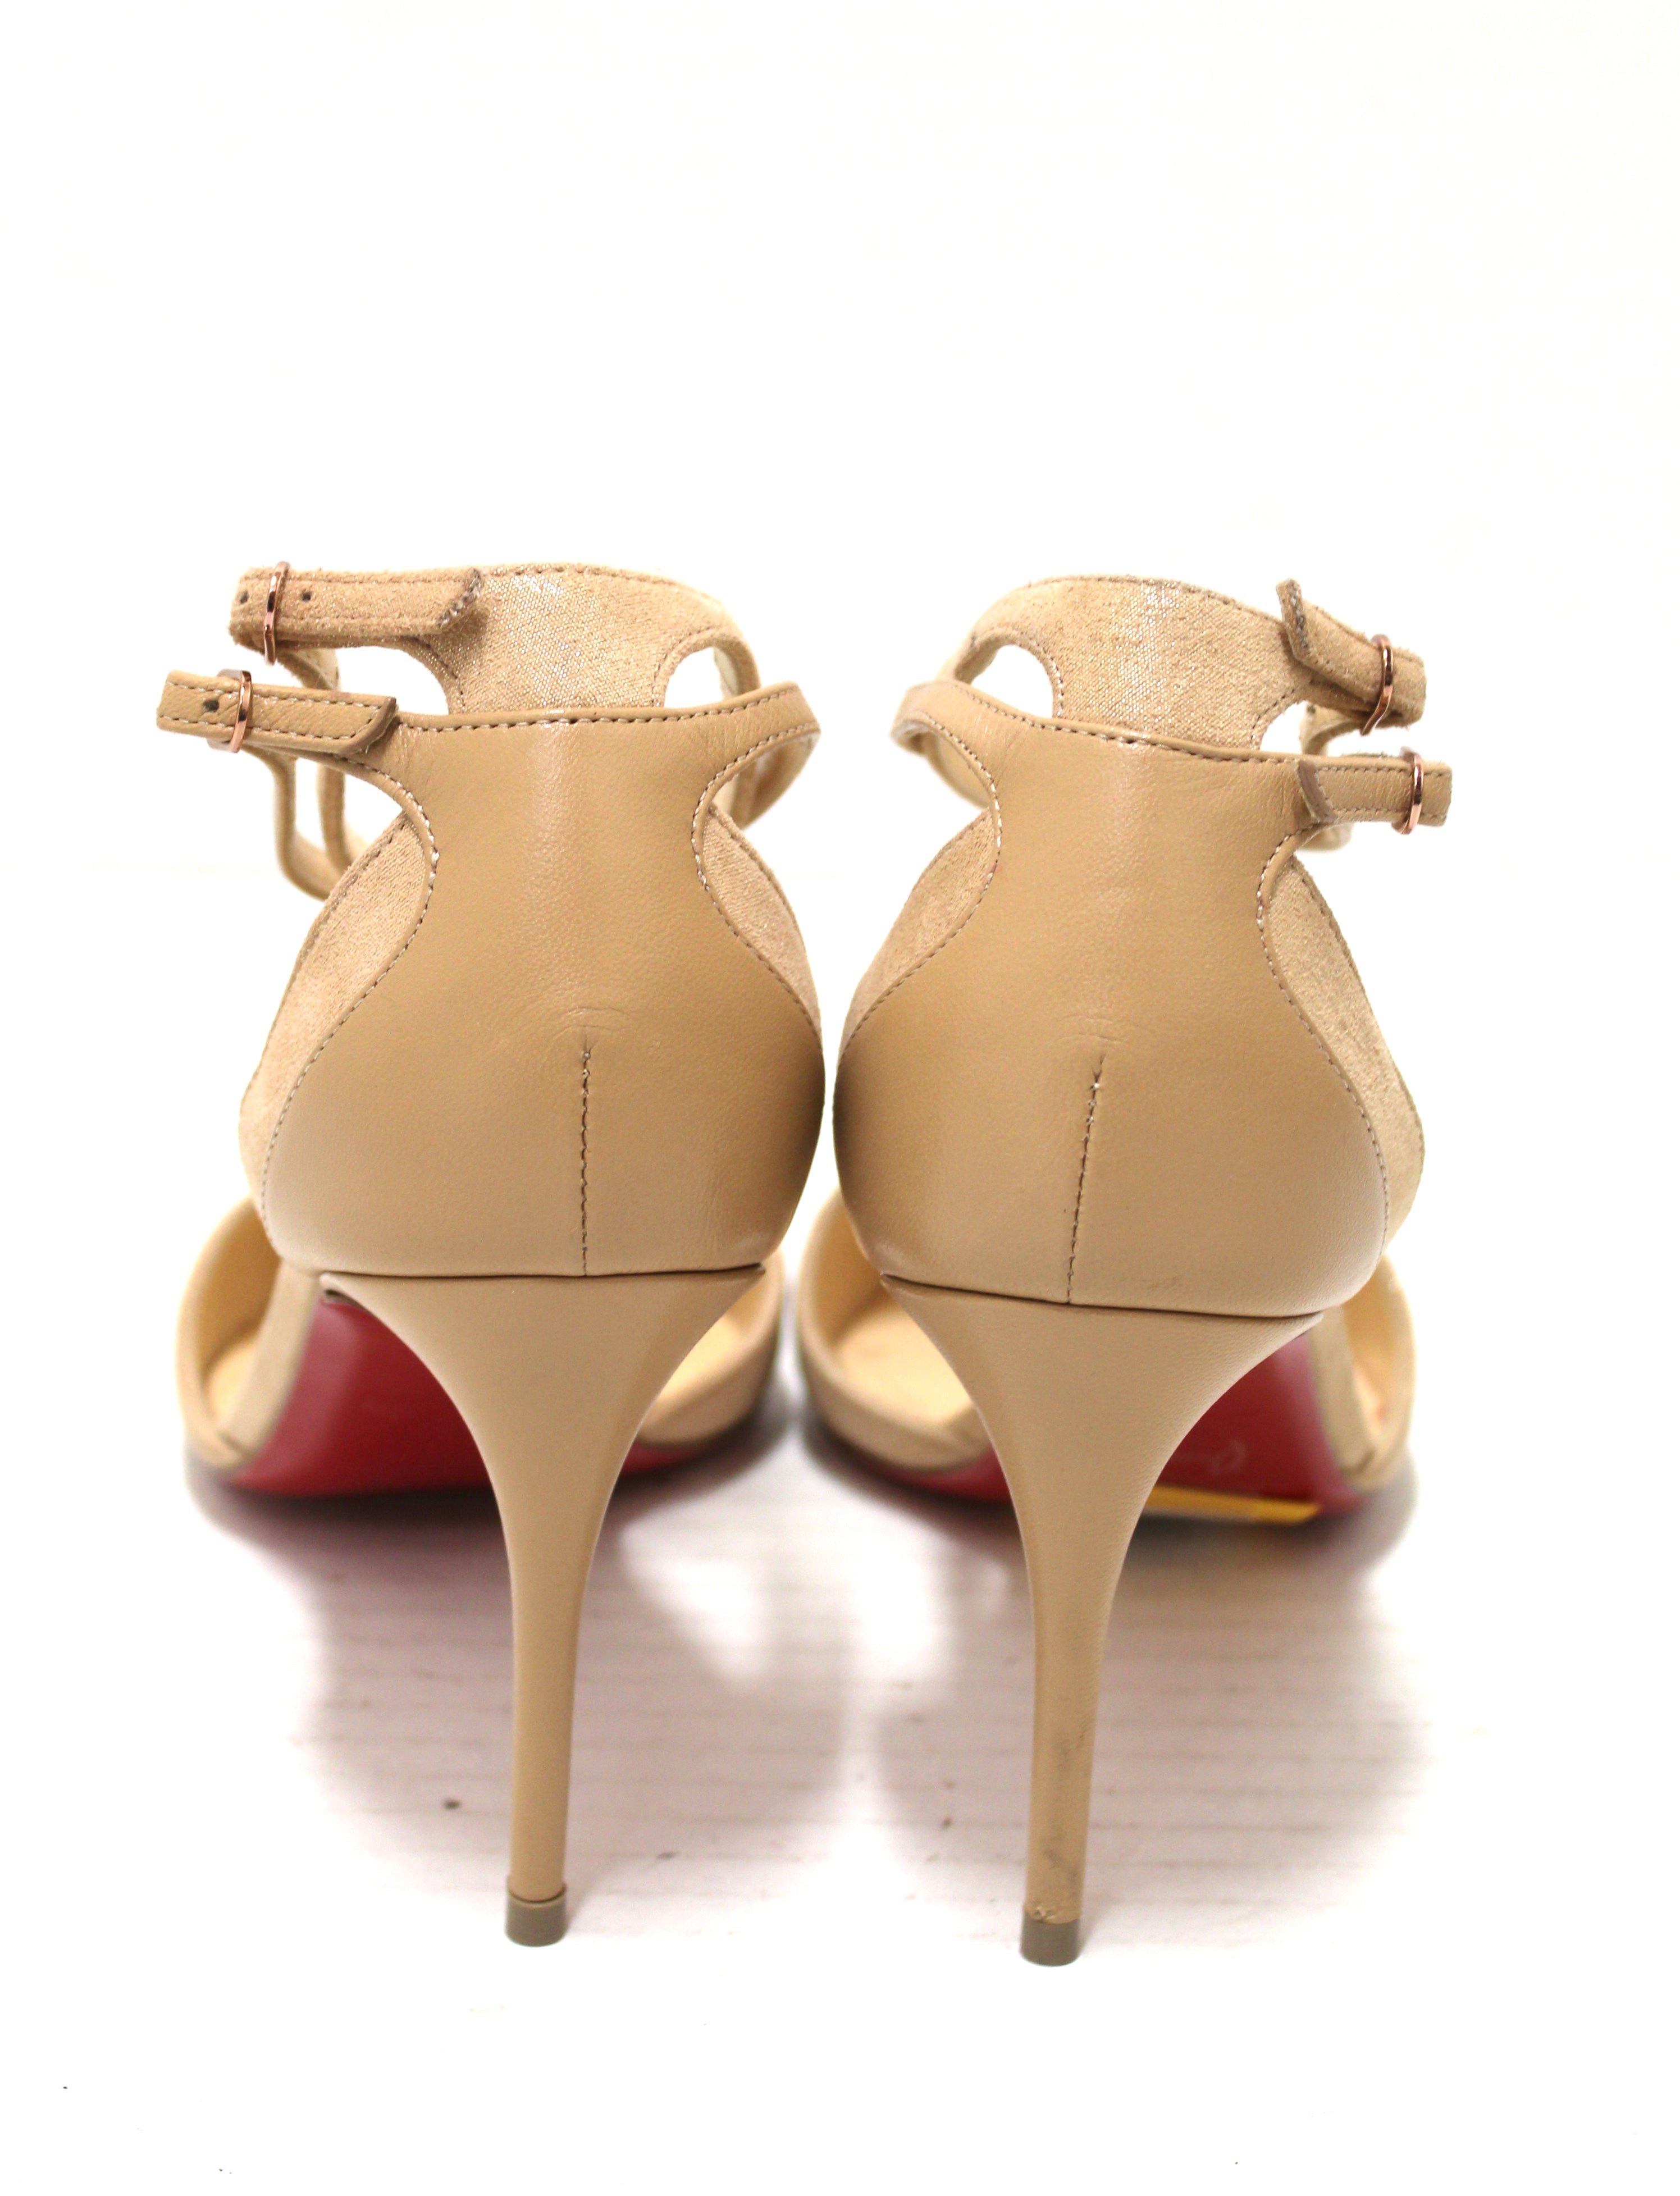 Authentic Christian Louboutin Beige Nude Uptown Double 85 Pumps Shoes Size 36